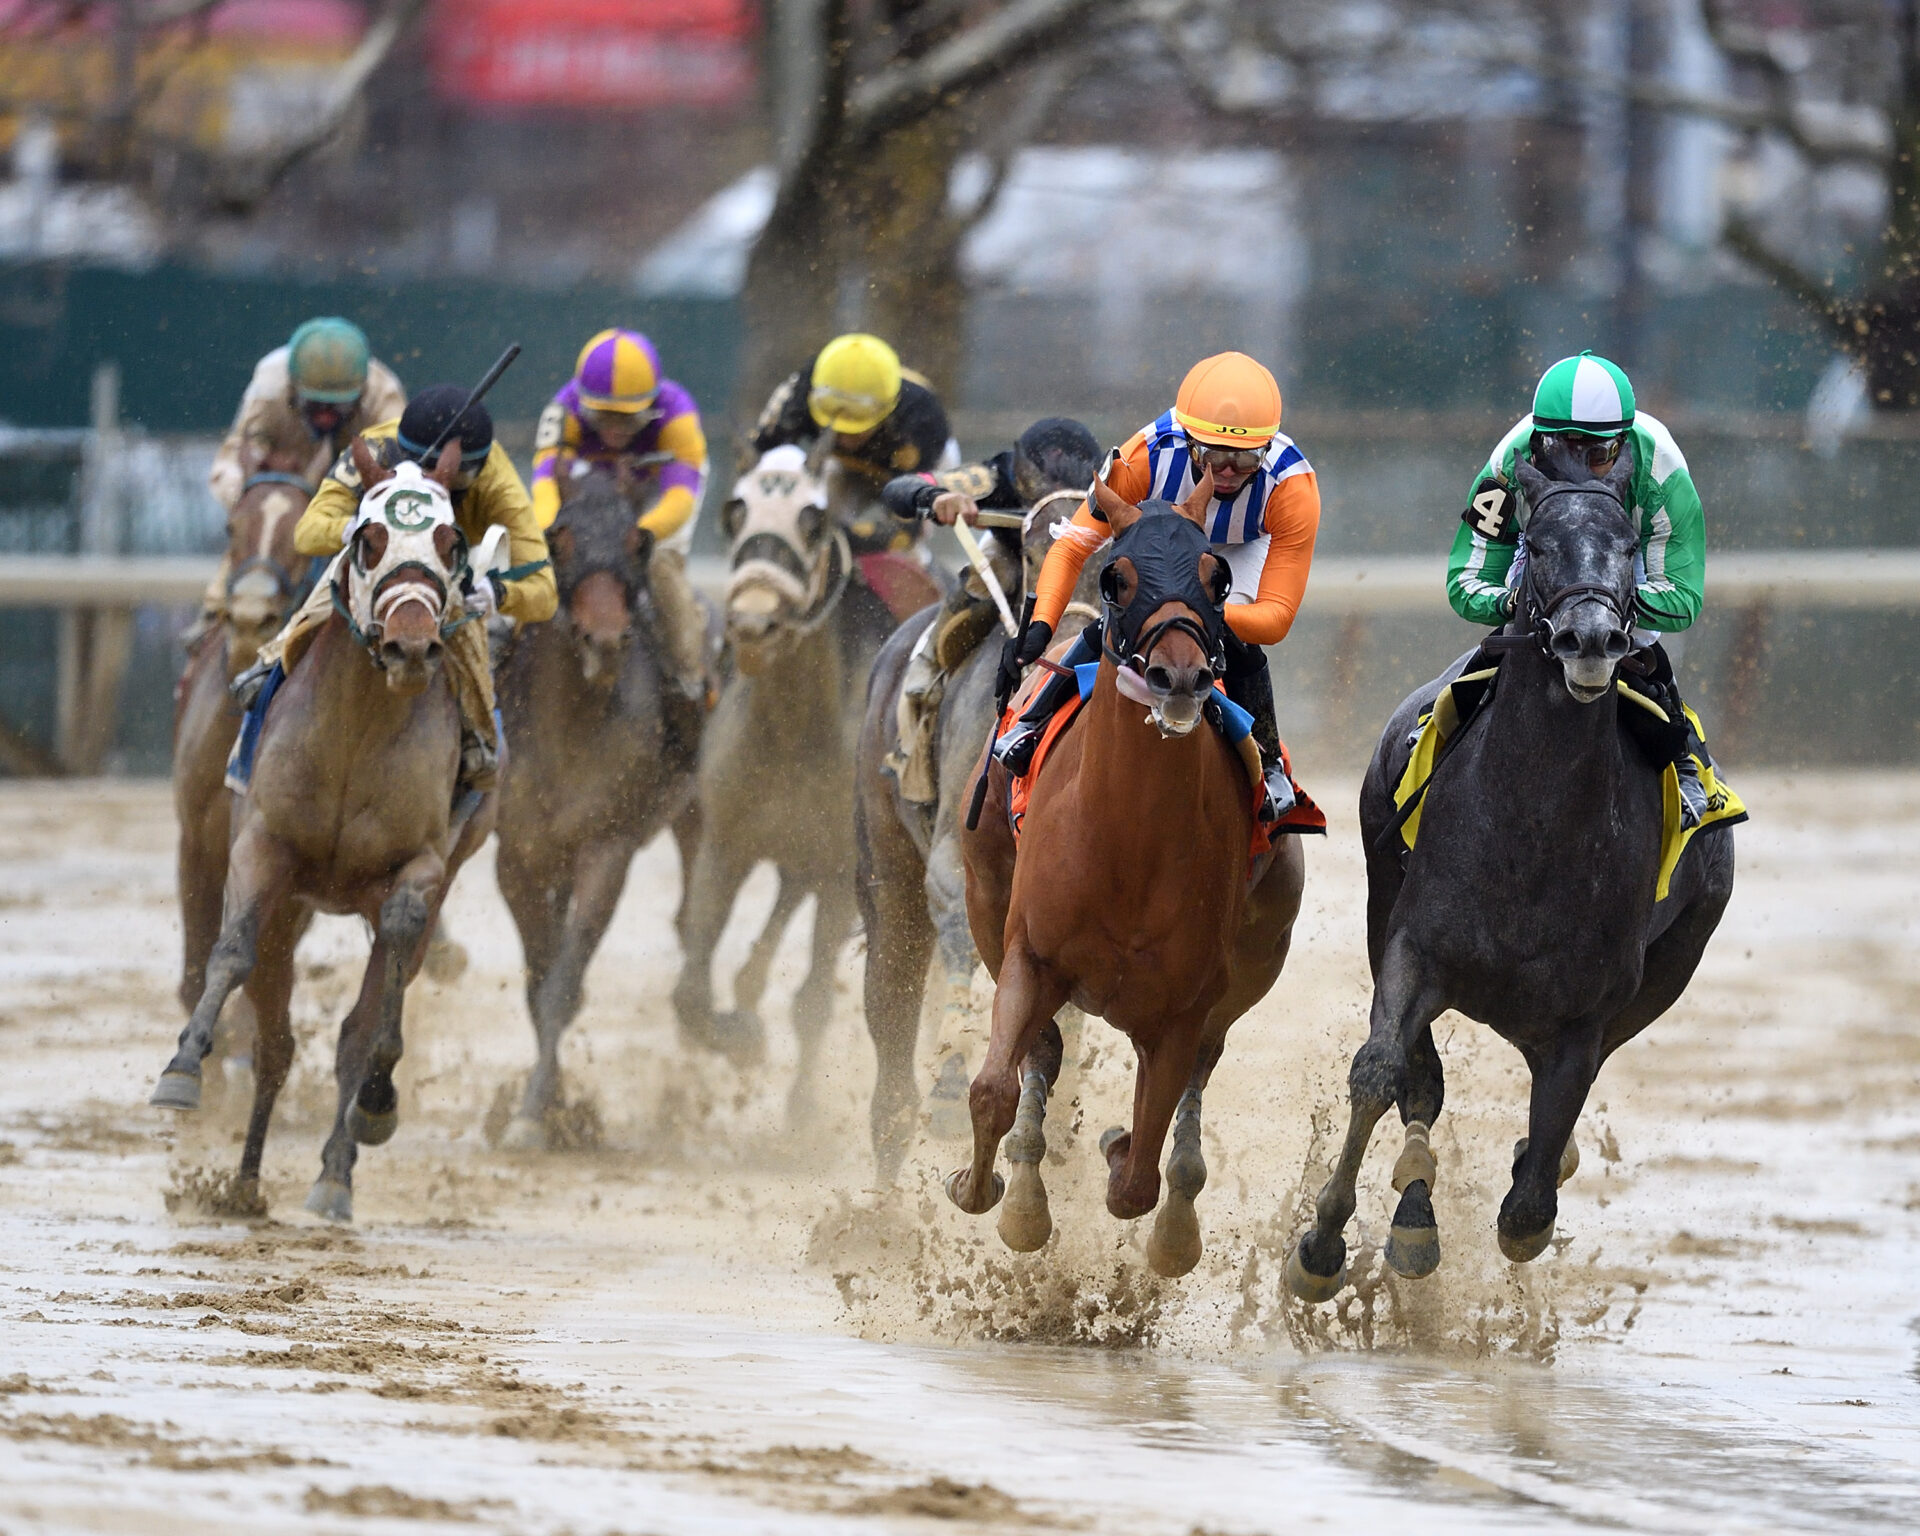 Top 5 Kentucky Derby 2023 Horses Remsen Stakes Top 2 Dubyuhnell